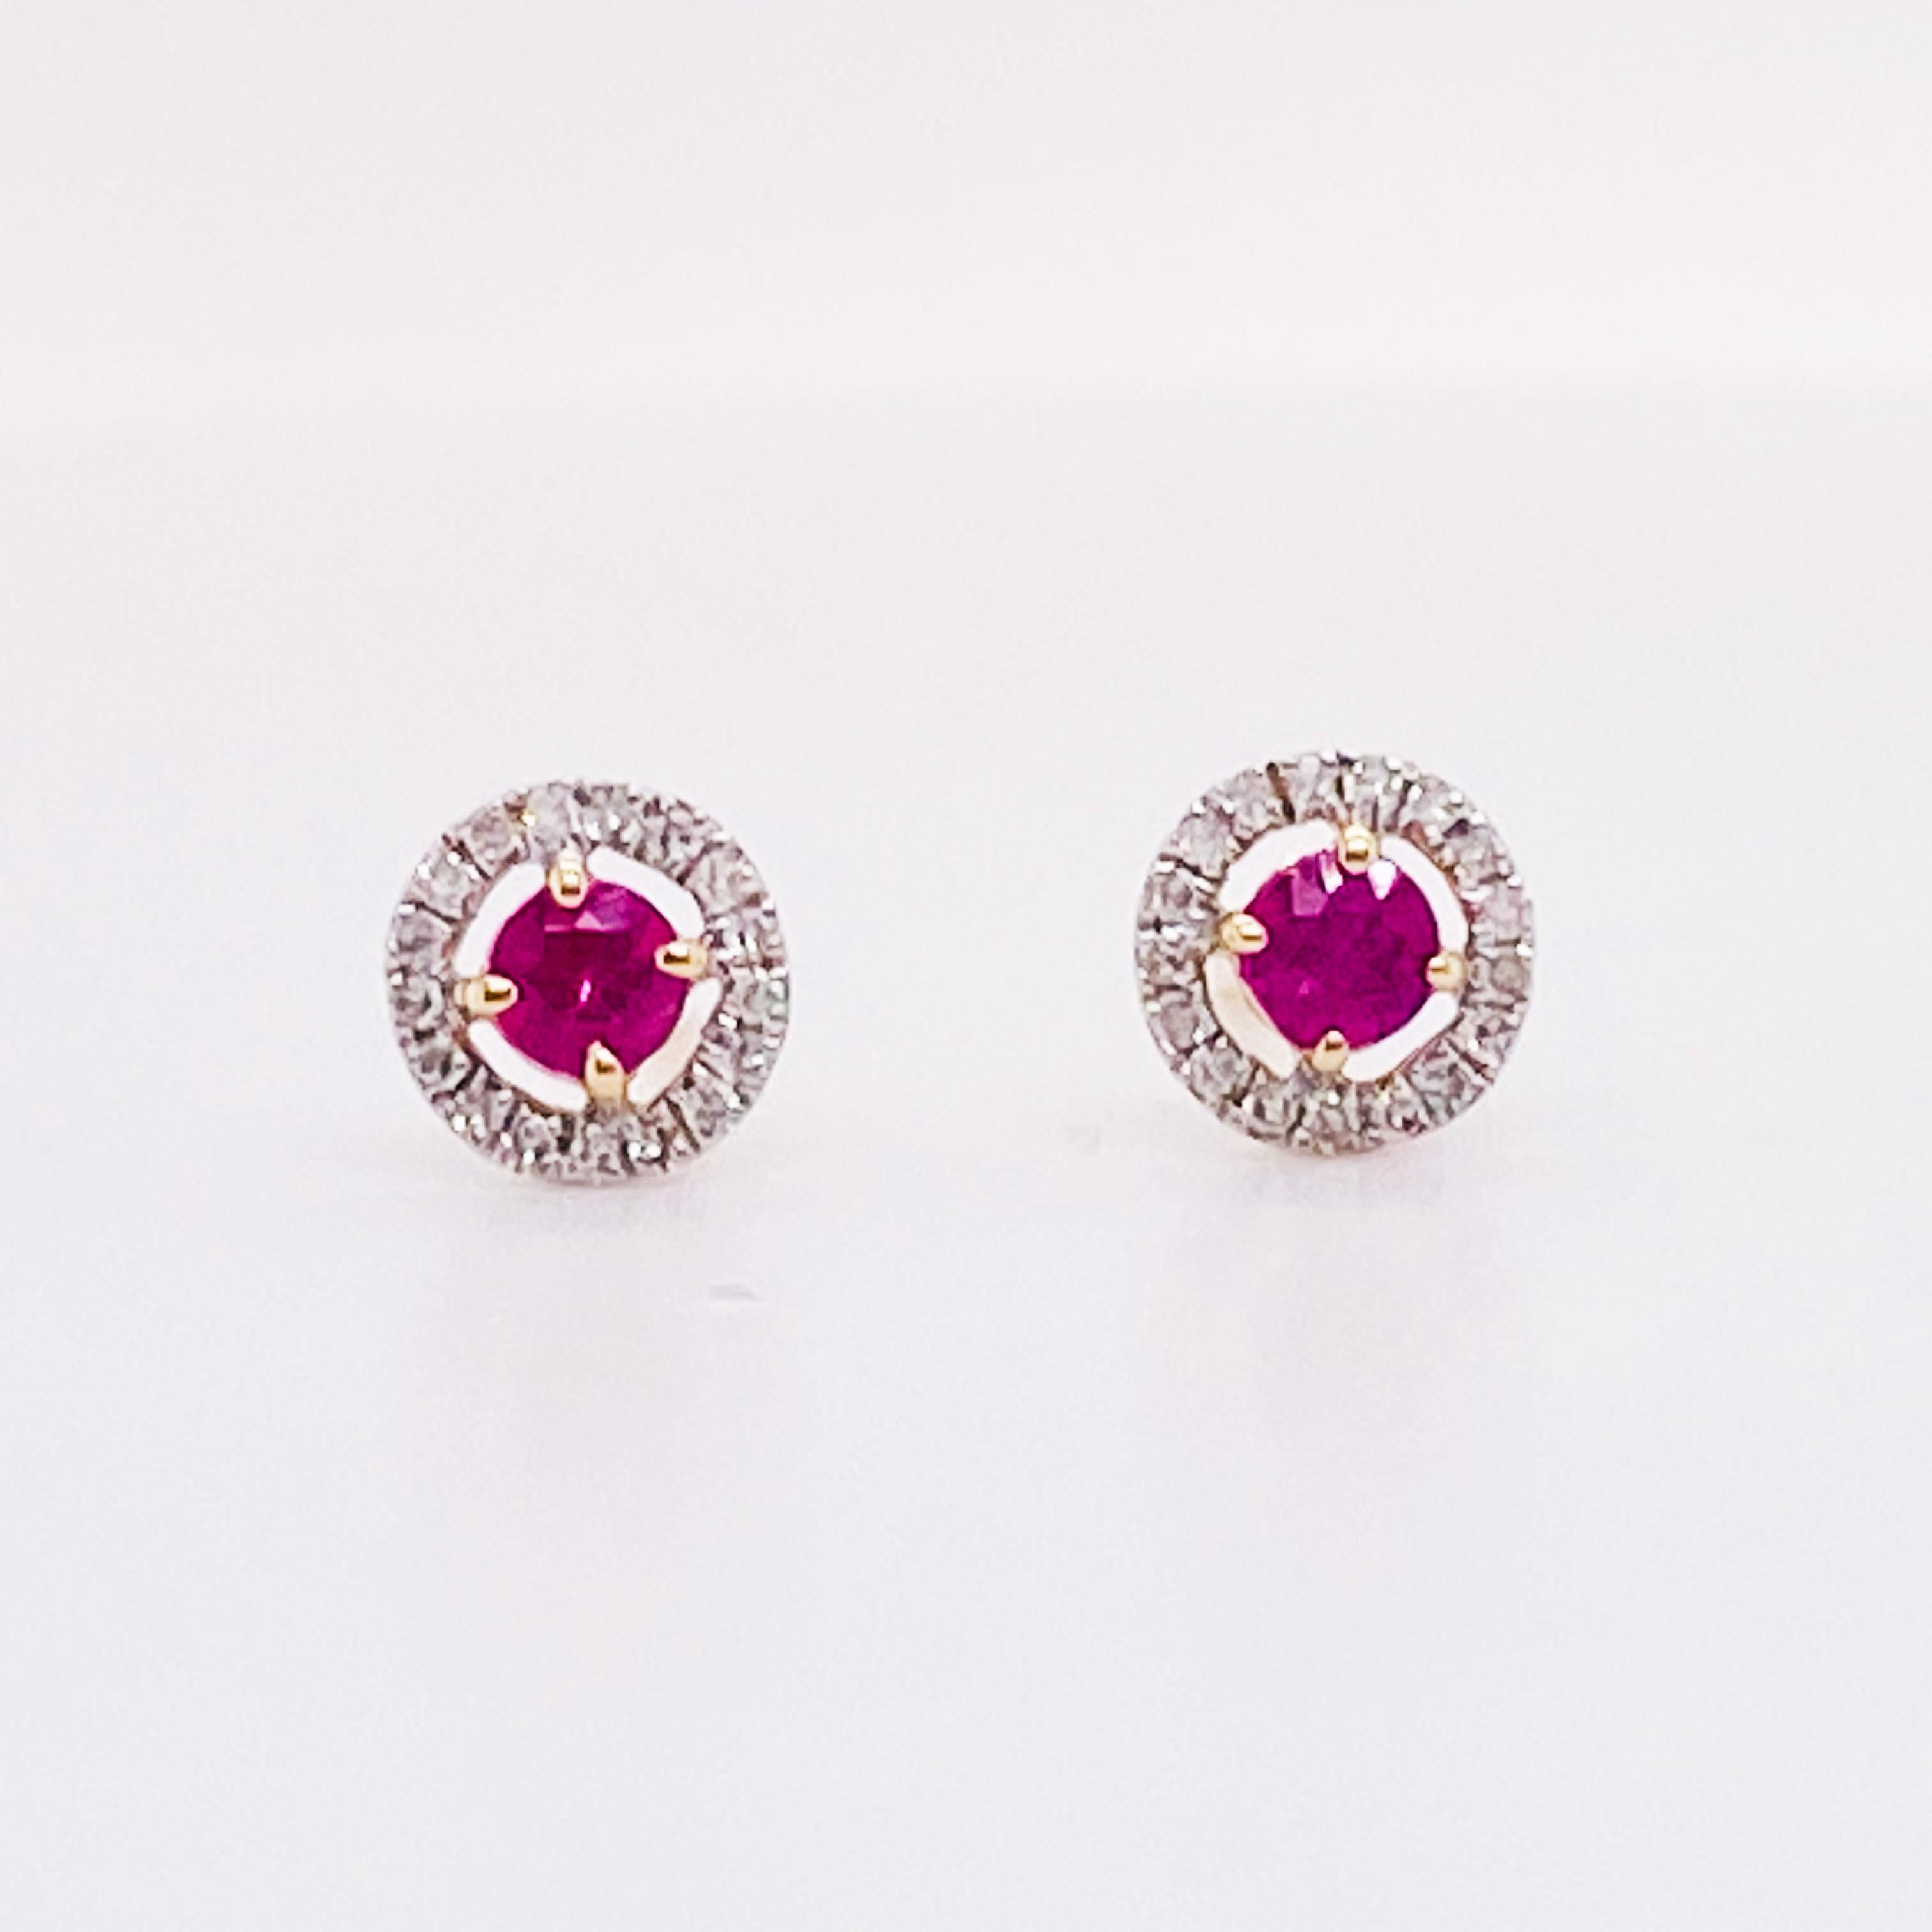 These minimalist ruby and diamond earrings shine bright in your earlobe. The rubies are a bright red color surrounded by gorgeous white diamonds. The earrings are 6 millimeters in diameter and all the genuine, natural gemstones and diamonds are set